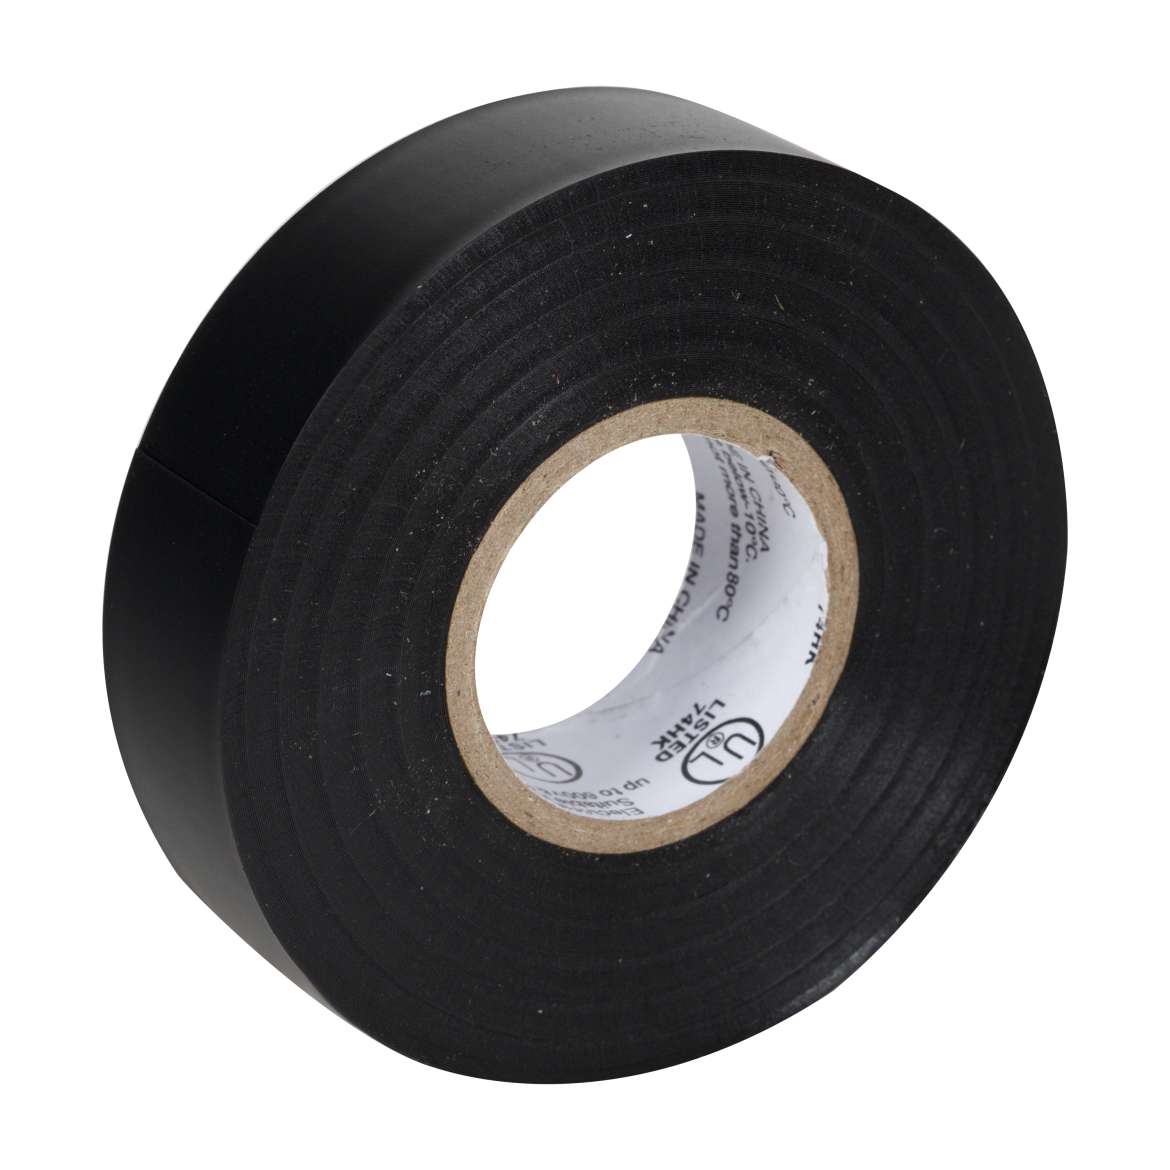 Professional Electrical Tape